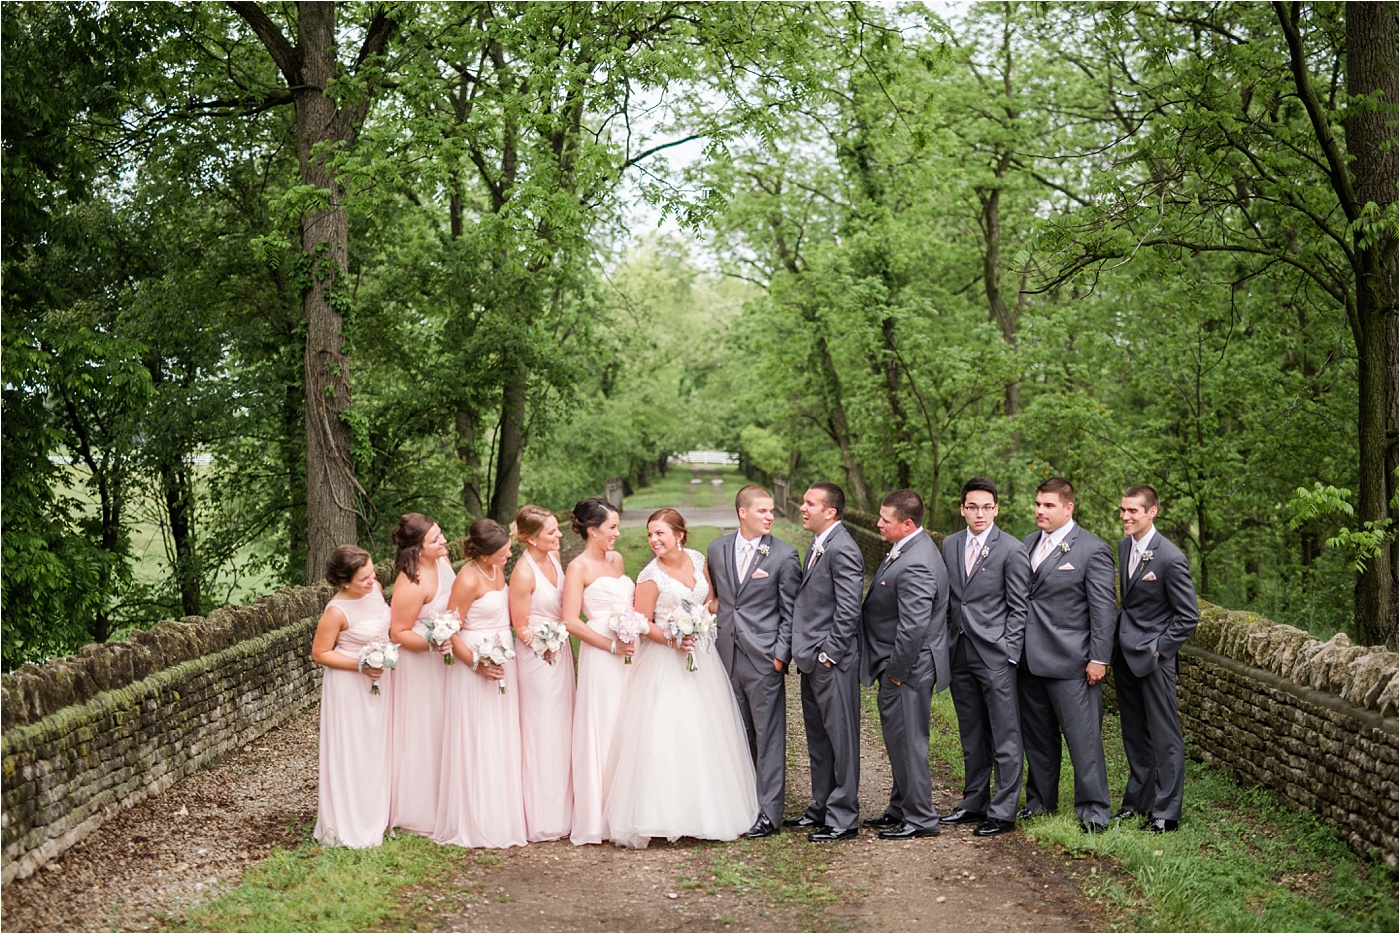 A Blush Outdoor wedding at Irongate Equestrian | KariMe Photography_0114